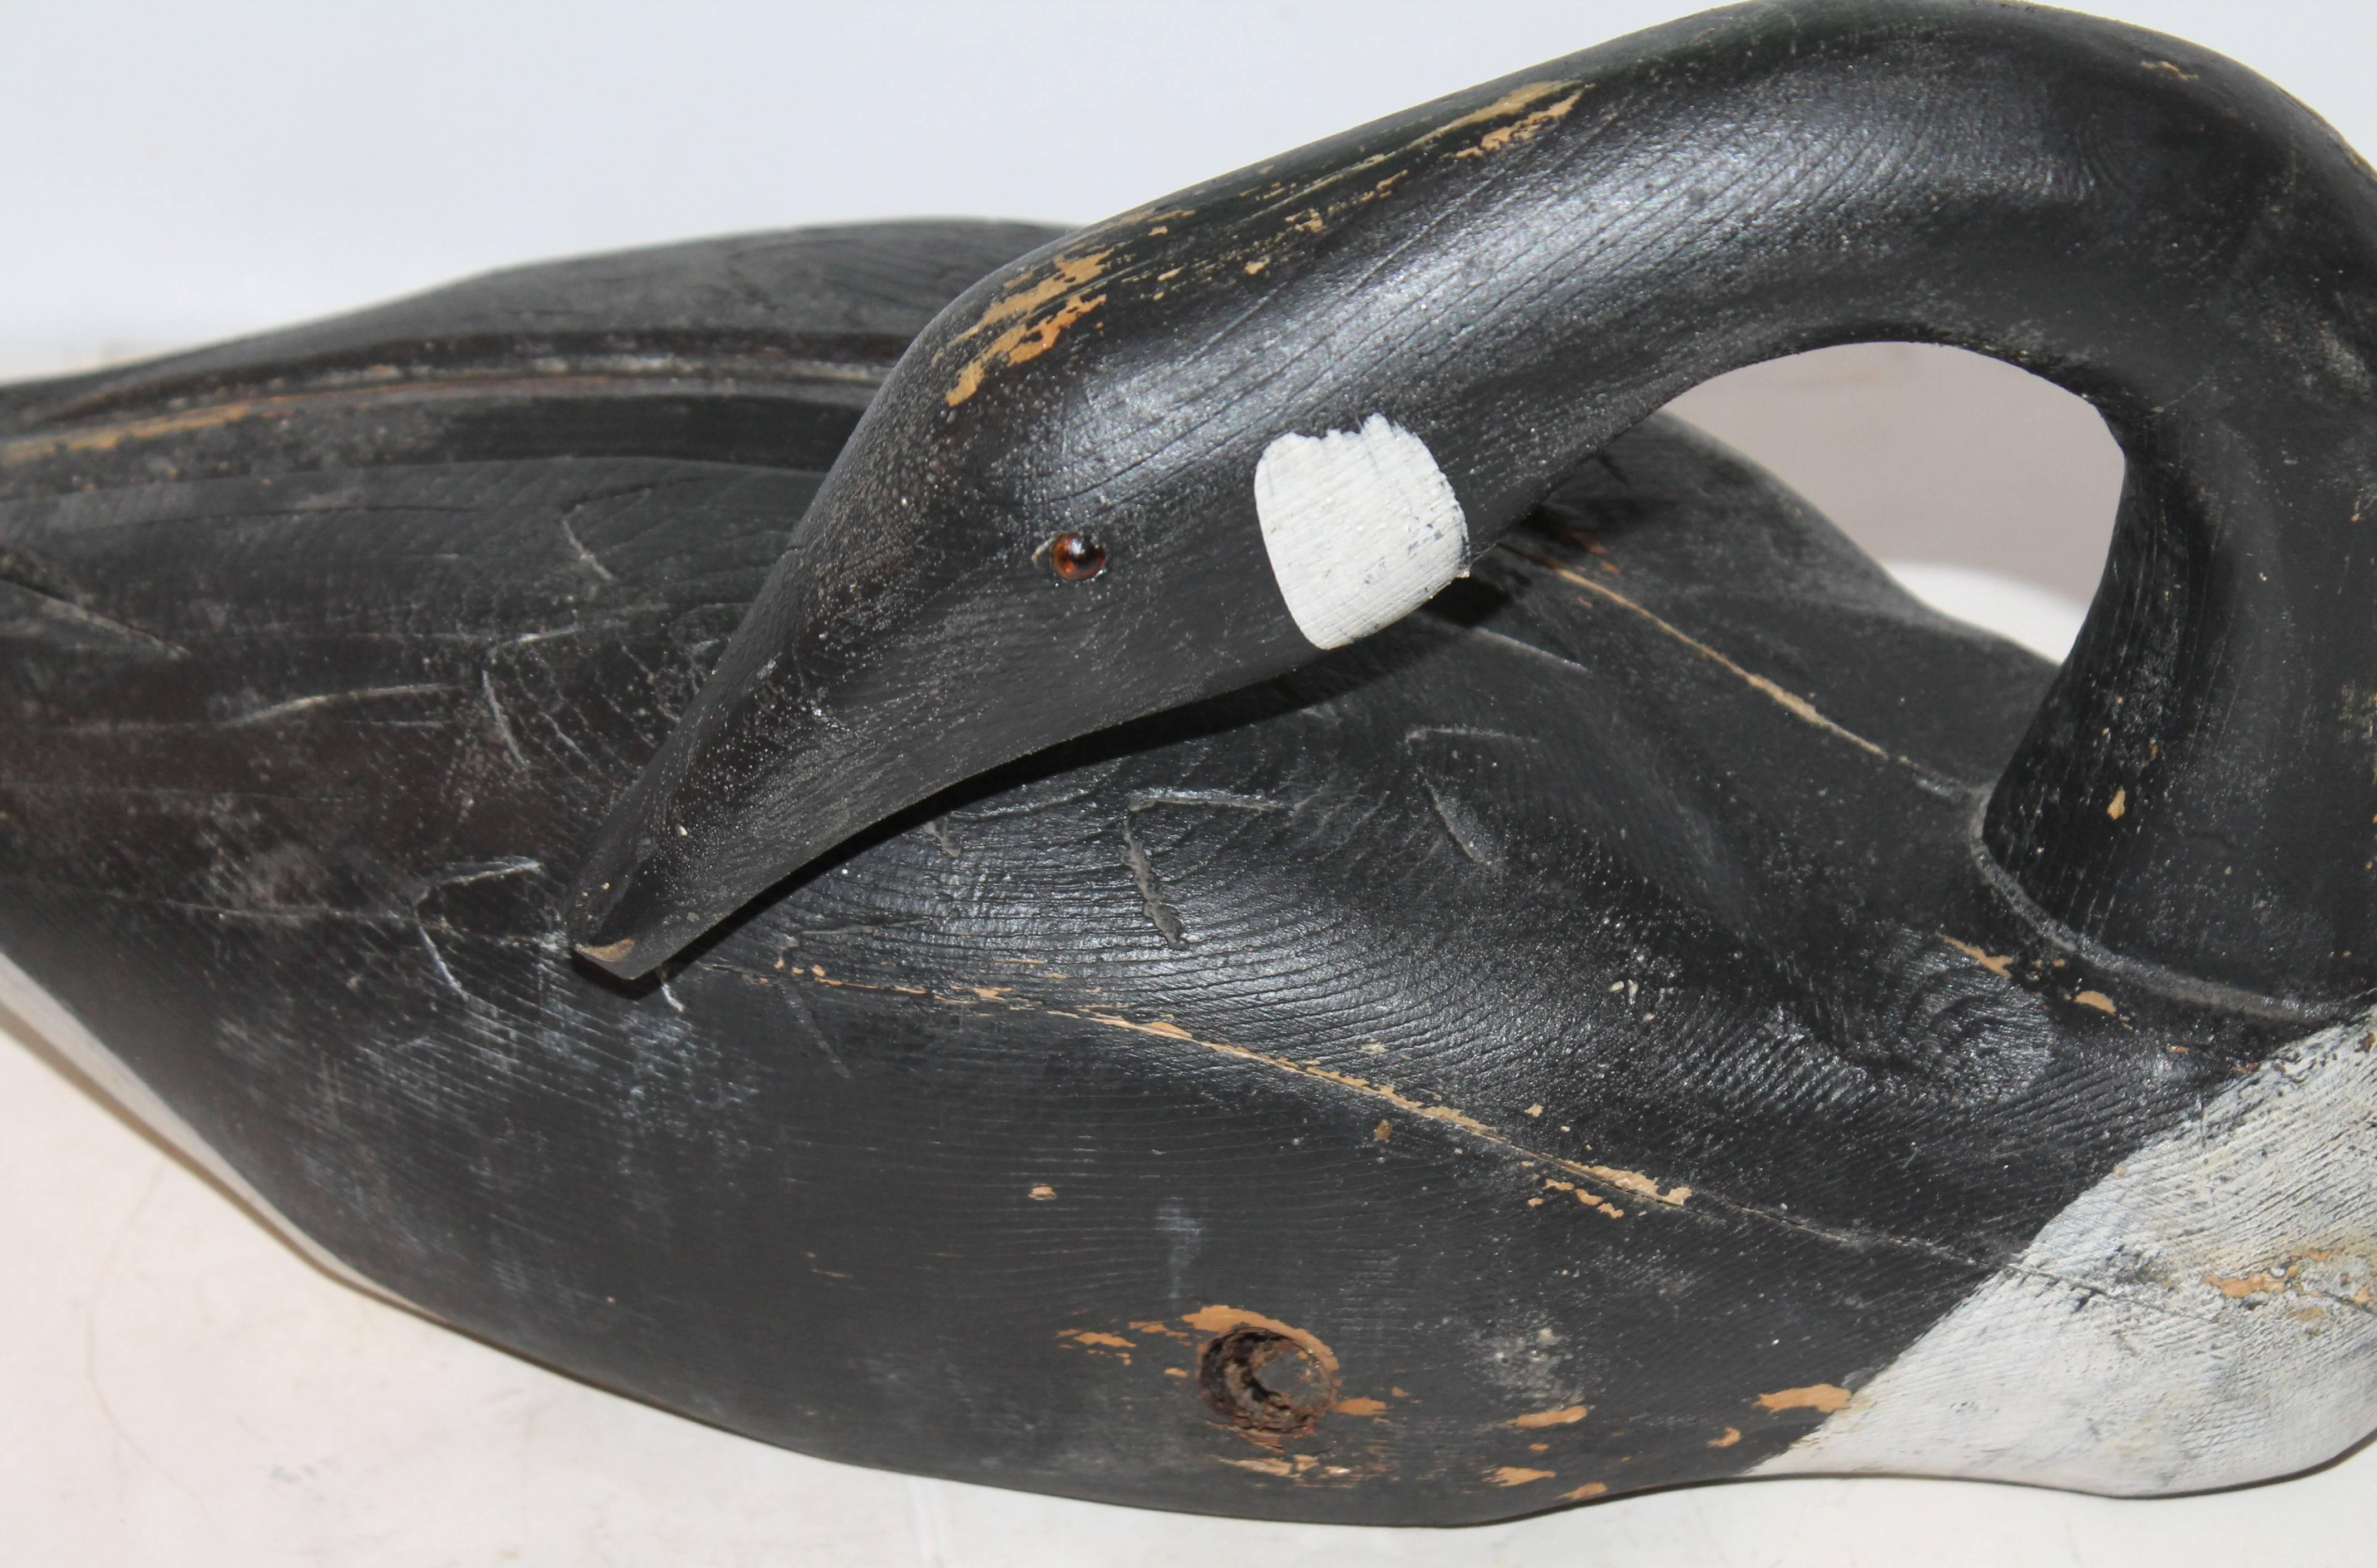 This beautiful Canadian goose decoy is in great condition. This Goose has original paint and great patina. The bottom of the goose where the weight and anchor once were shows the wear of the original wood over time. This goose is in all around great